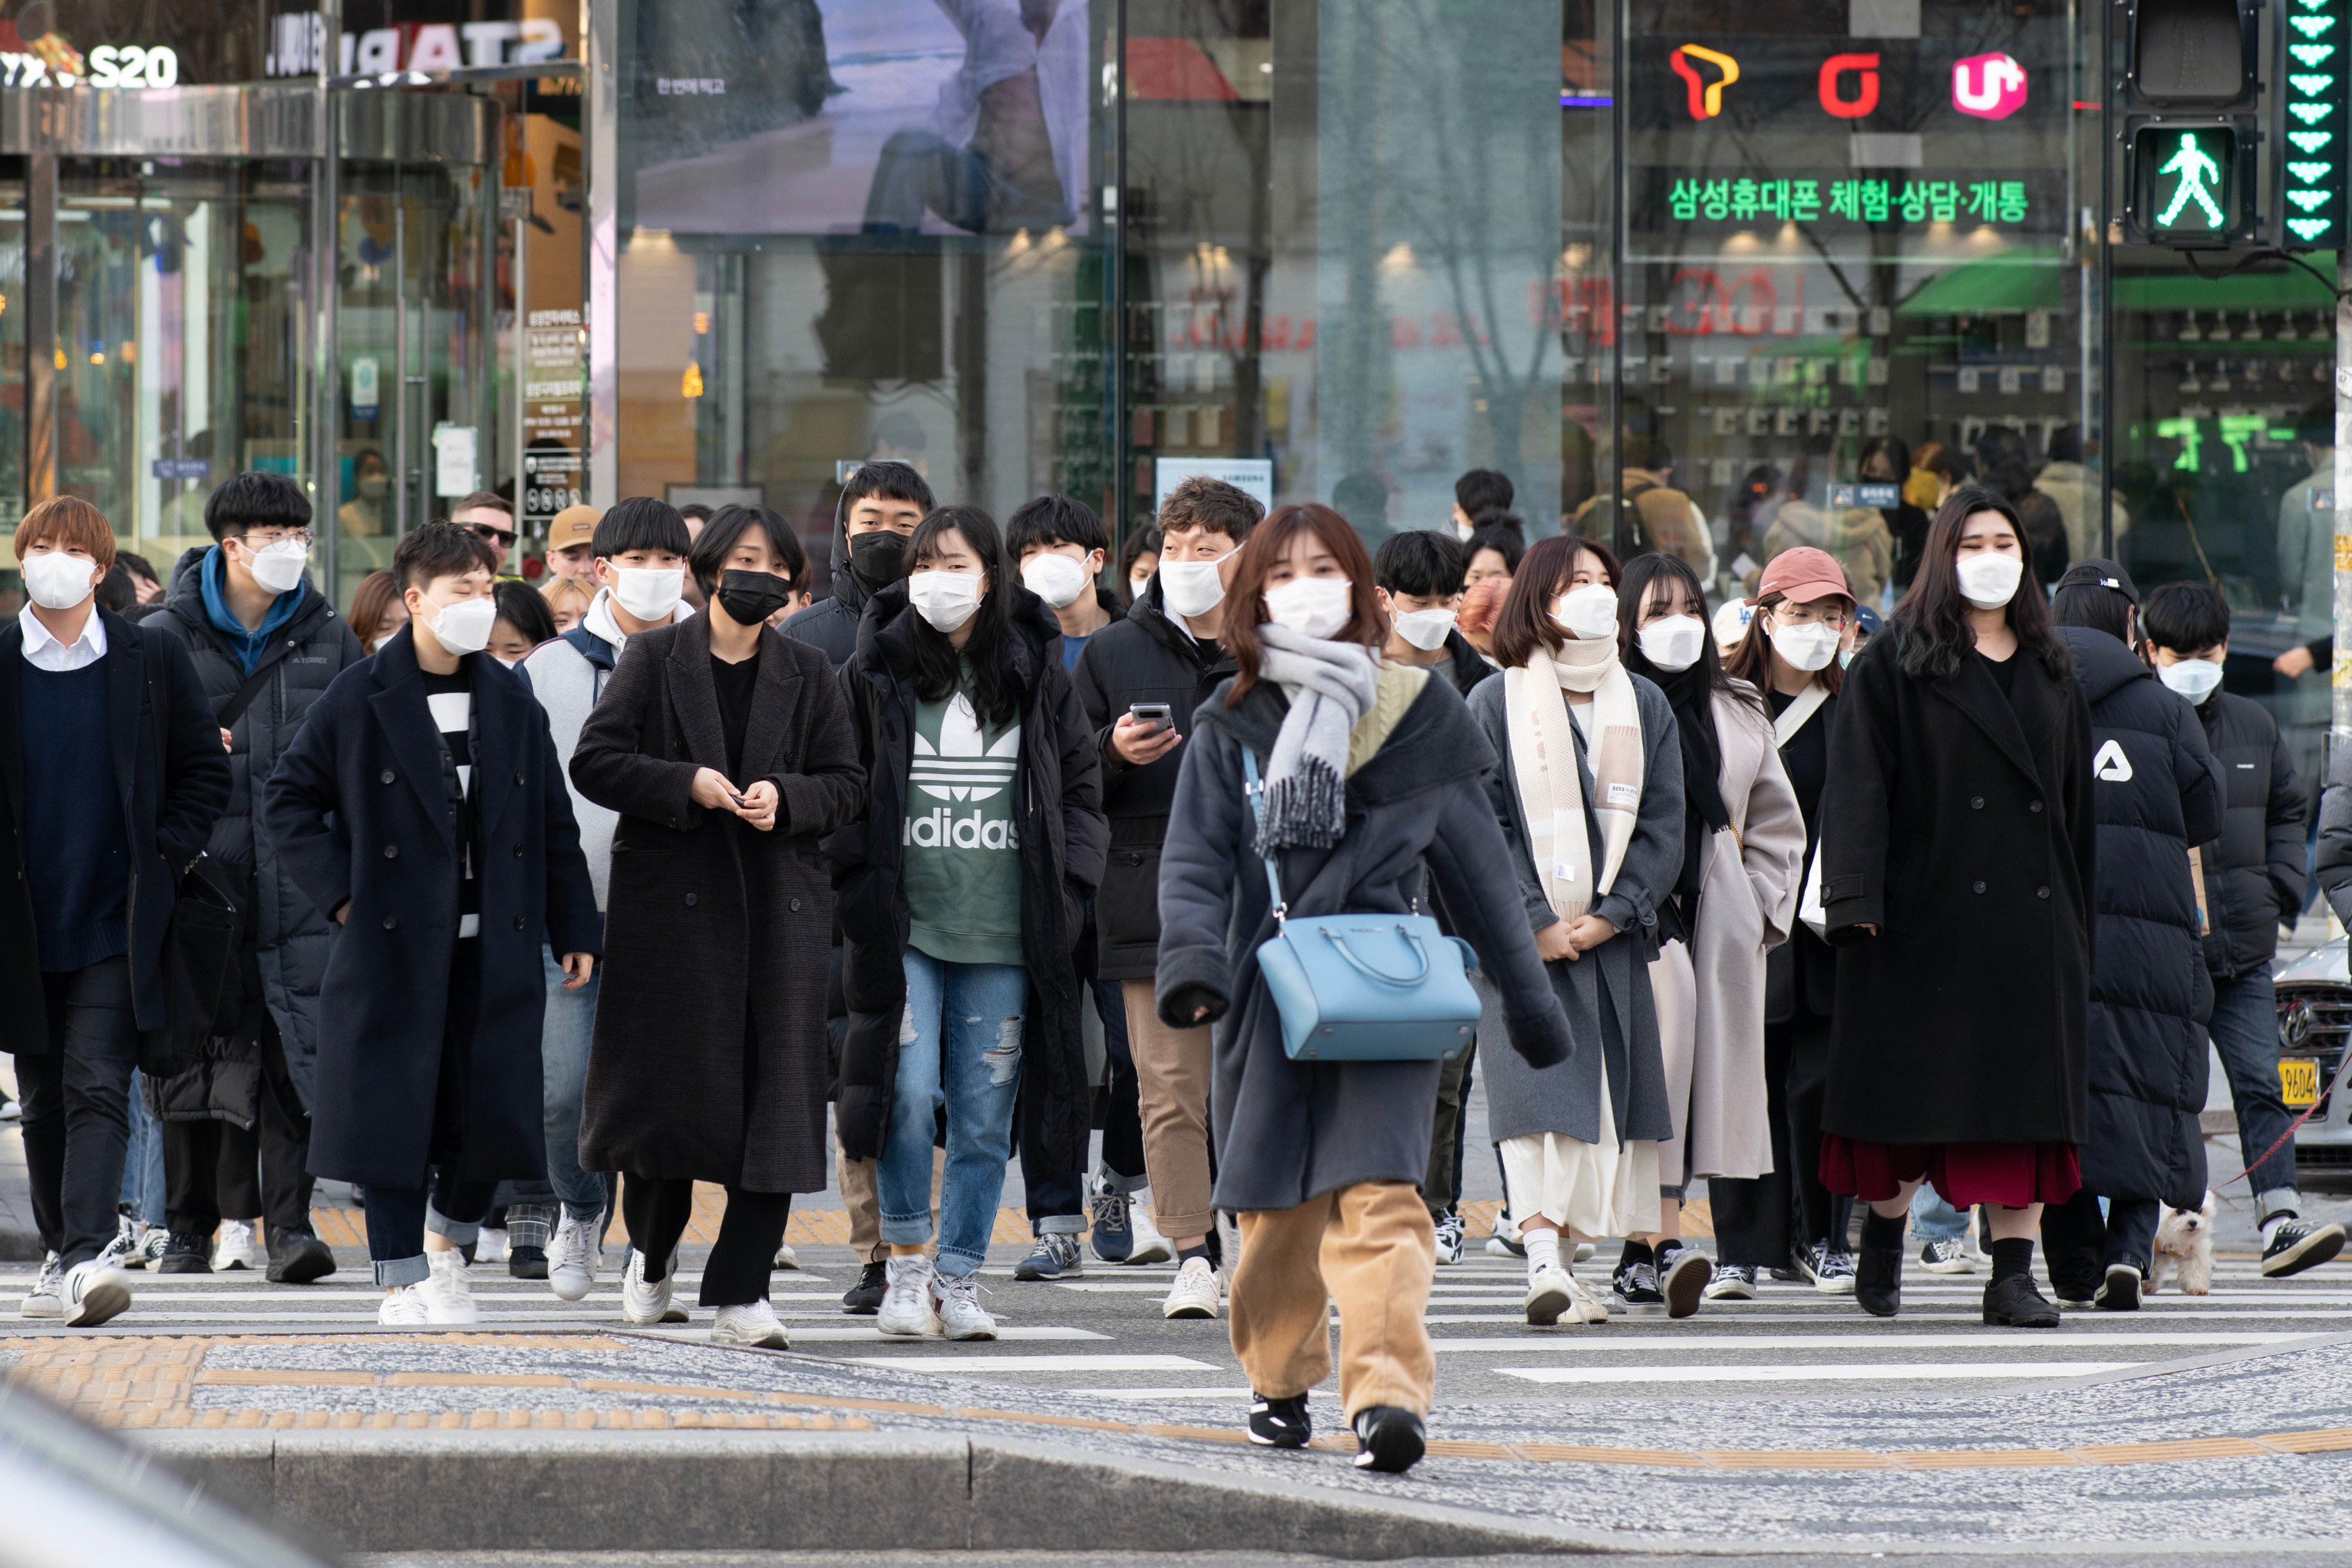 South Korea’s efficient digital connectivity and widespread social media networks provided fertile ground for online bullies hiding behind online anonymity. Photo: Shutterstock